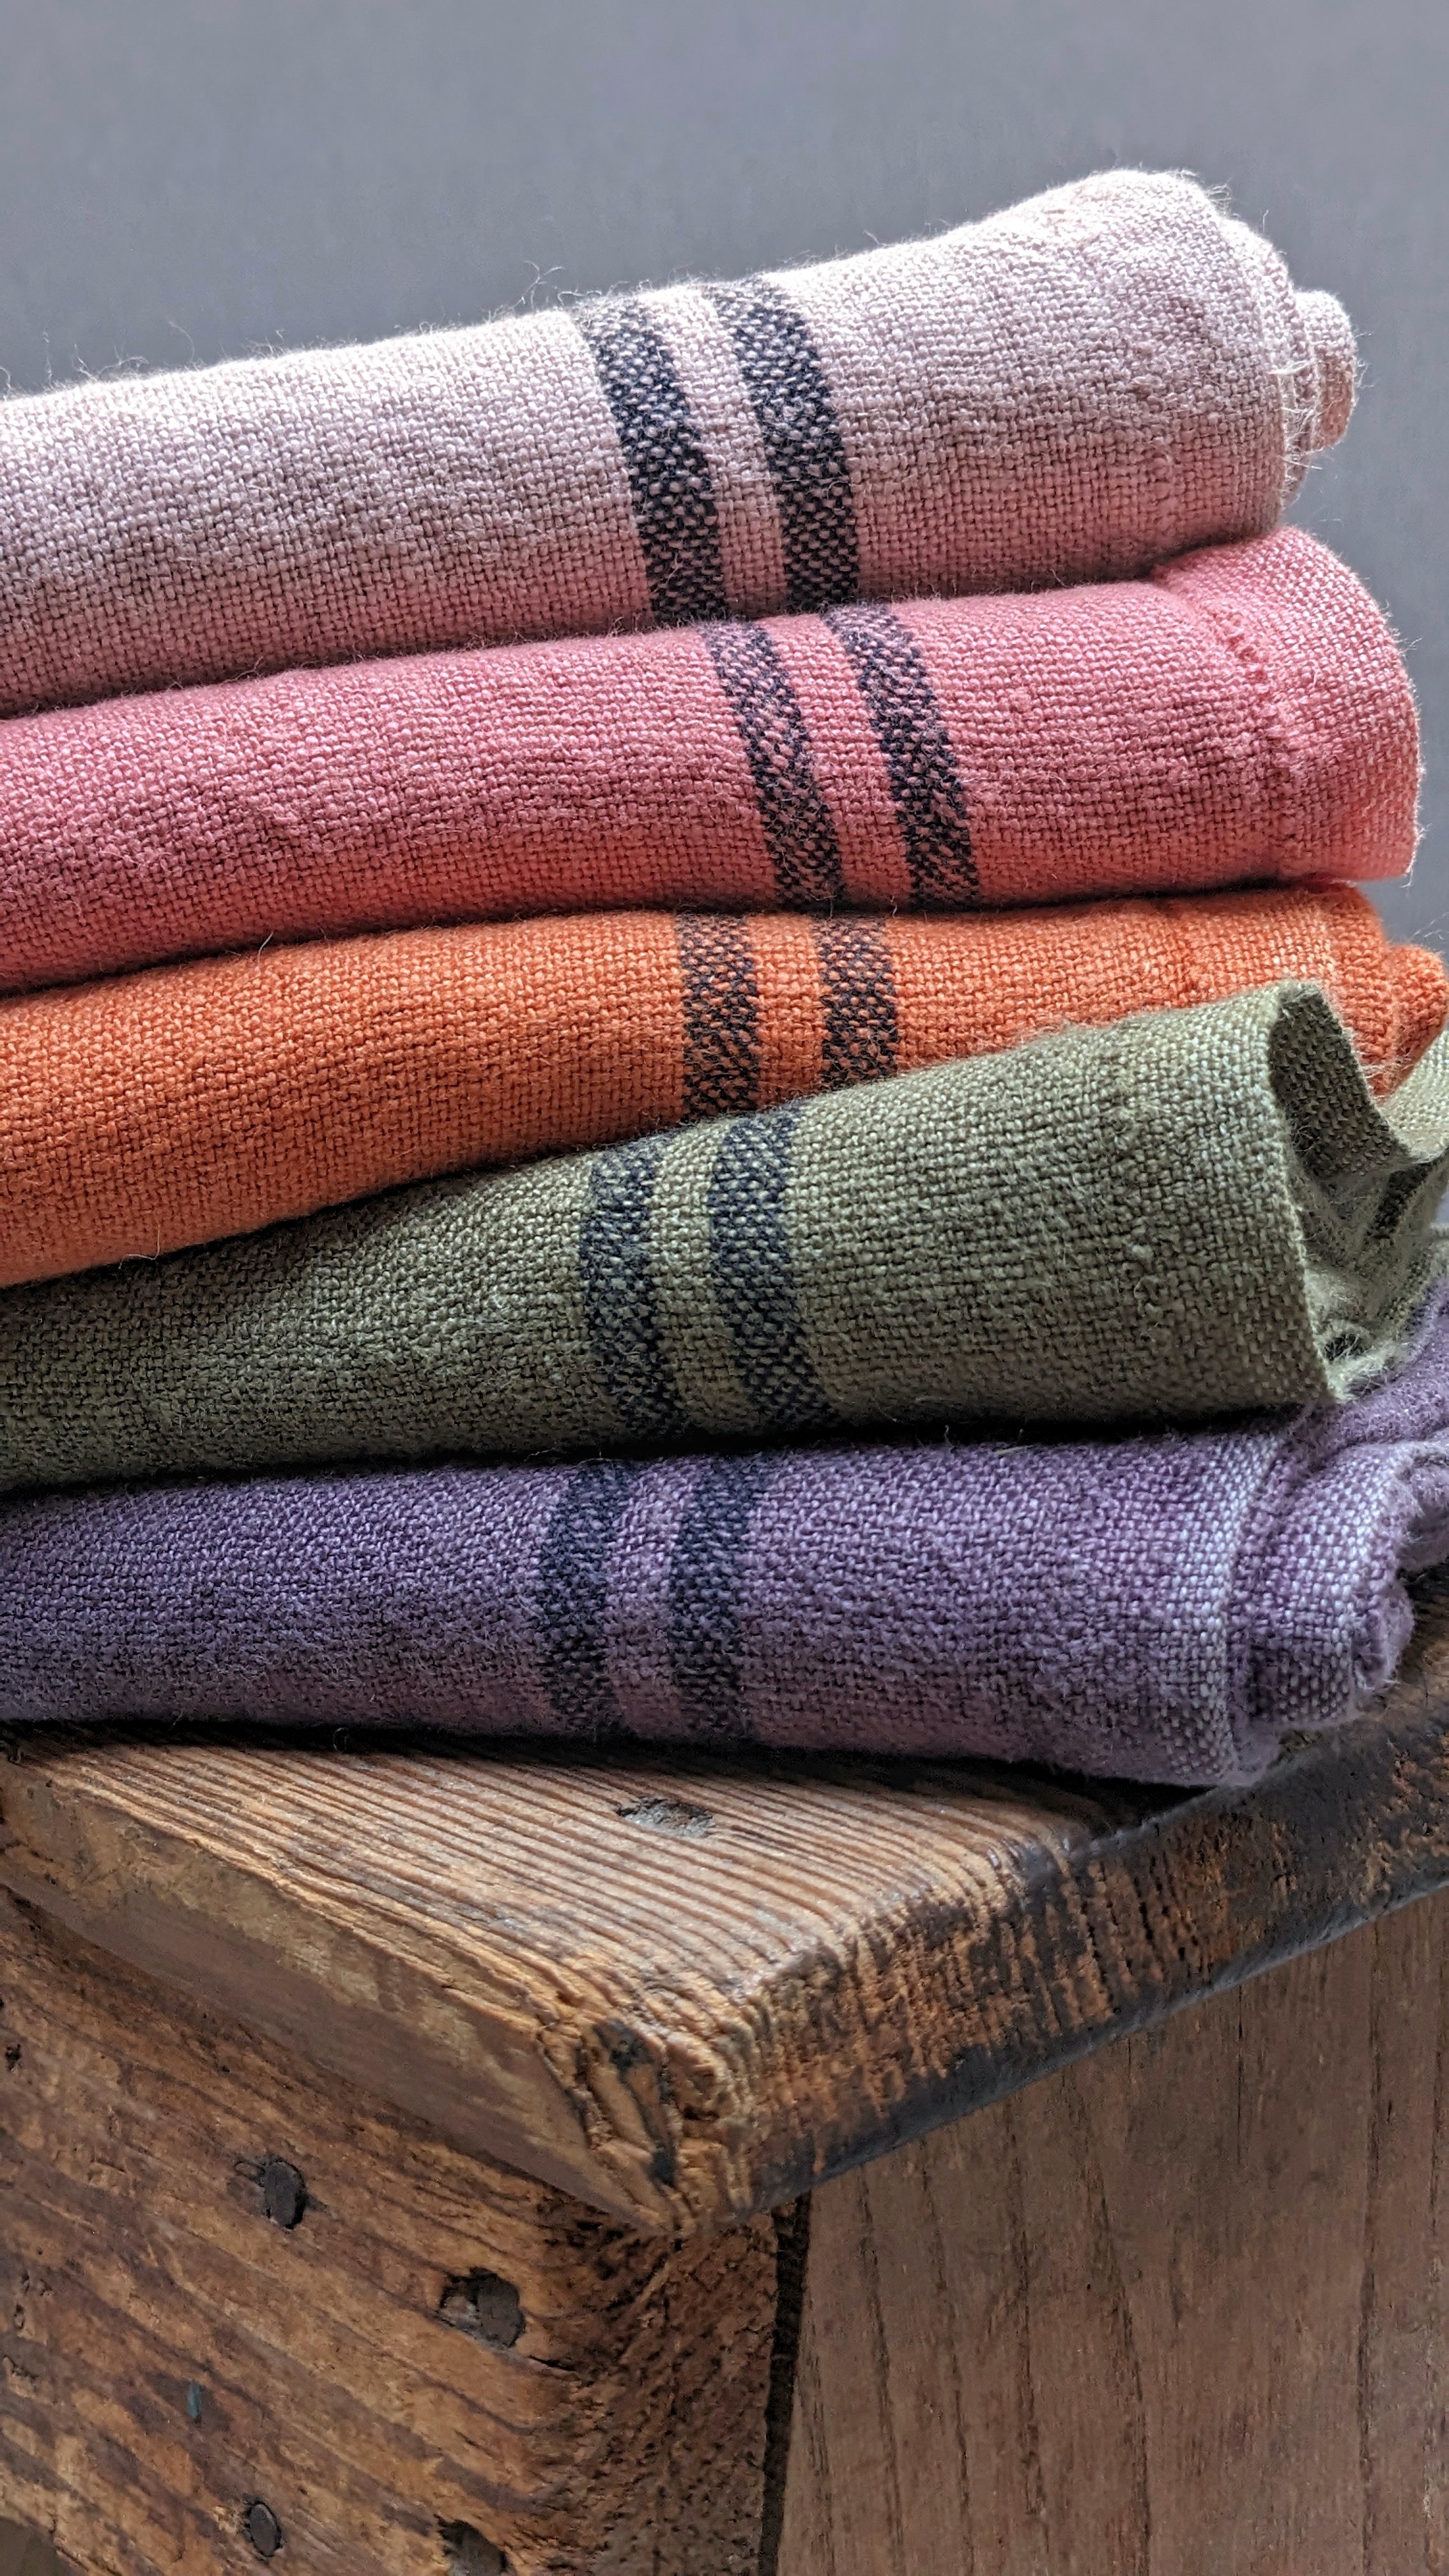 Charvet Editions "Country Washed & Dyed" (Avocat), Natural woven linen tea towel. Made in France.